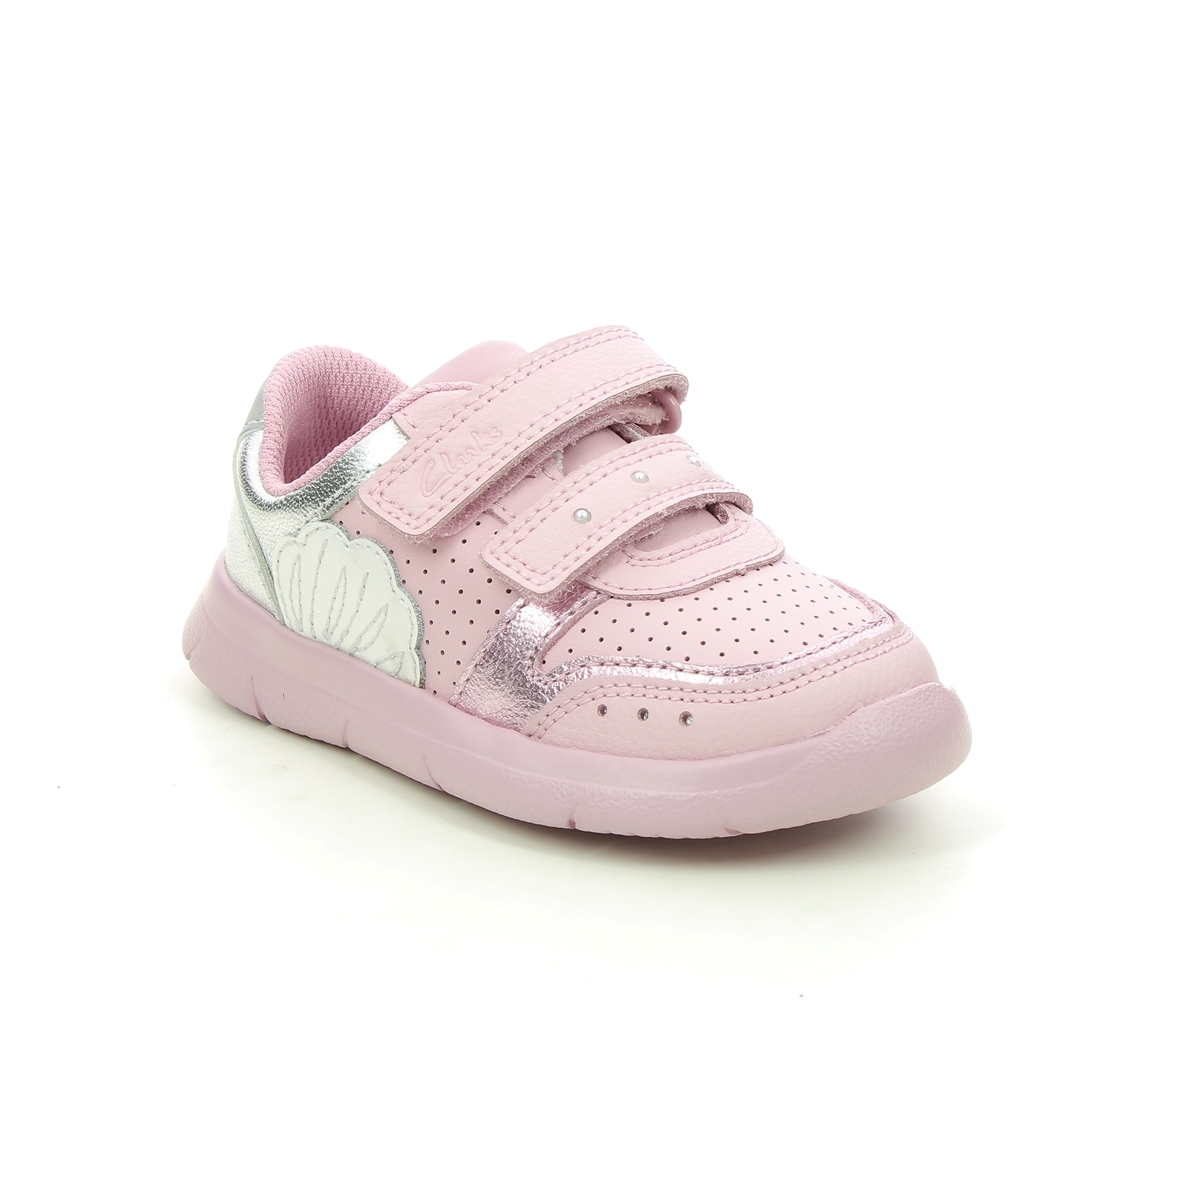 Clarks Ath Shell T Pink Leather Kids Toddler Girls Trainers 588097G In Size 6.5 In Plain Pink Leather G Width Fitting For kids